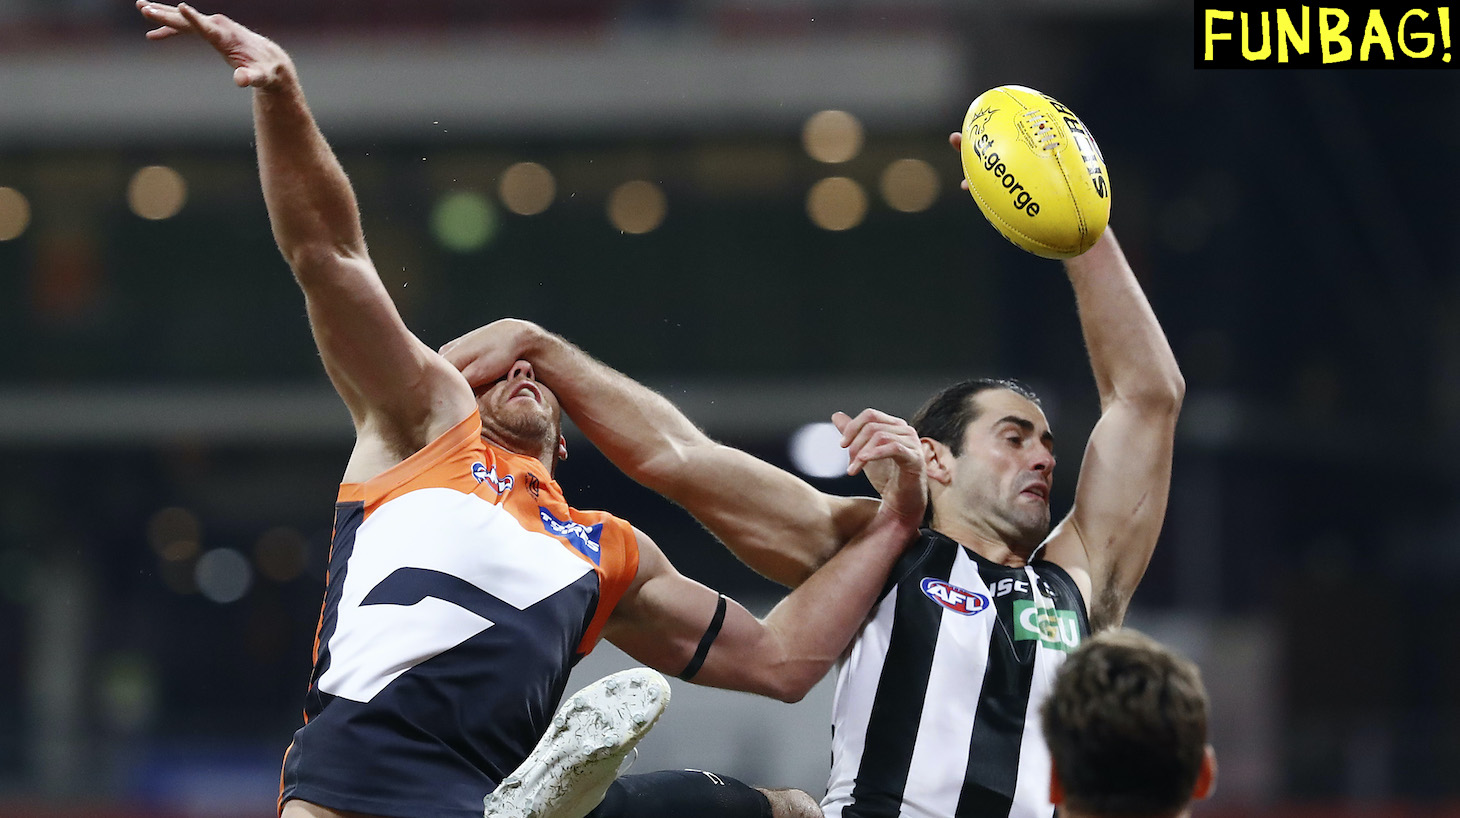 SYDNEY, AUSTRALIA - JUNE 26: Shane Mumford of the Giants competes for the ball against Brodie Grundy of the Magpies during the round 4 AFL match between Greater Western Sydney Giants and Collingwood Magpies at GIANTS Stadium on June 26, 2020 in Sydney, Australia. (Photo by Ryan Pierse/Getty Images)